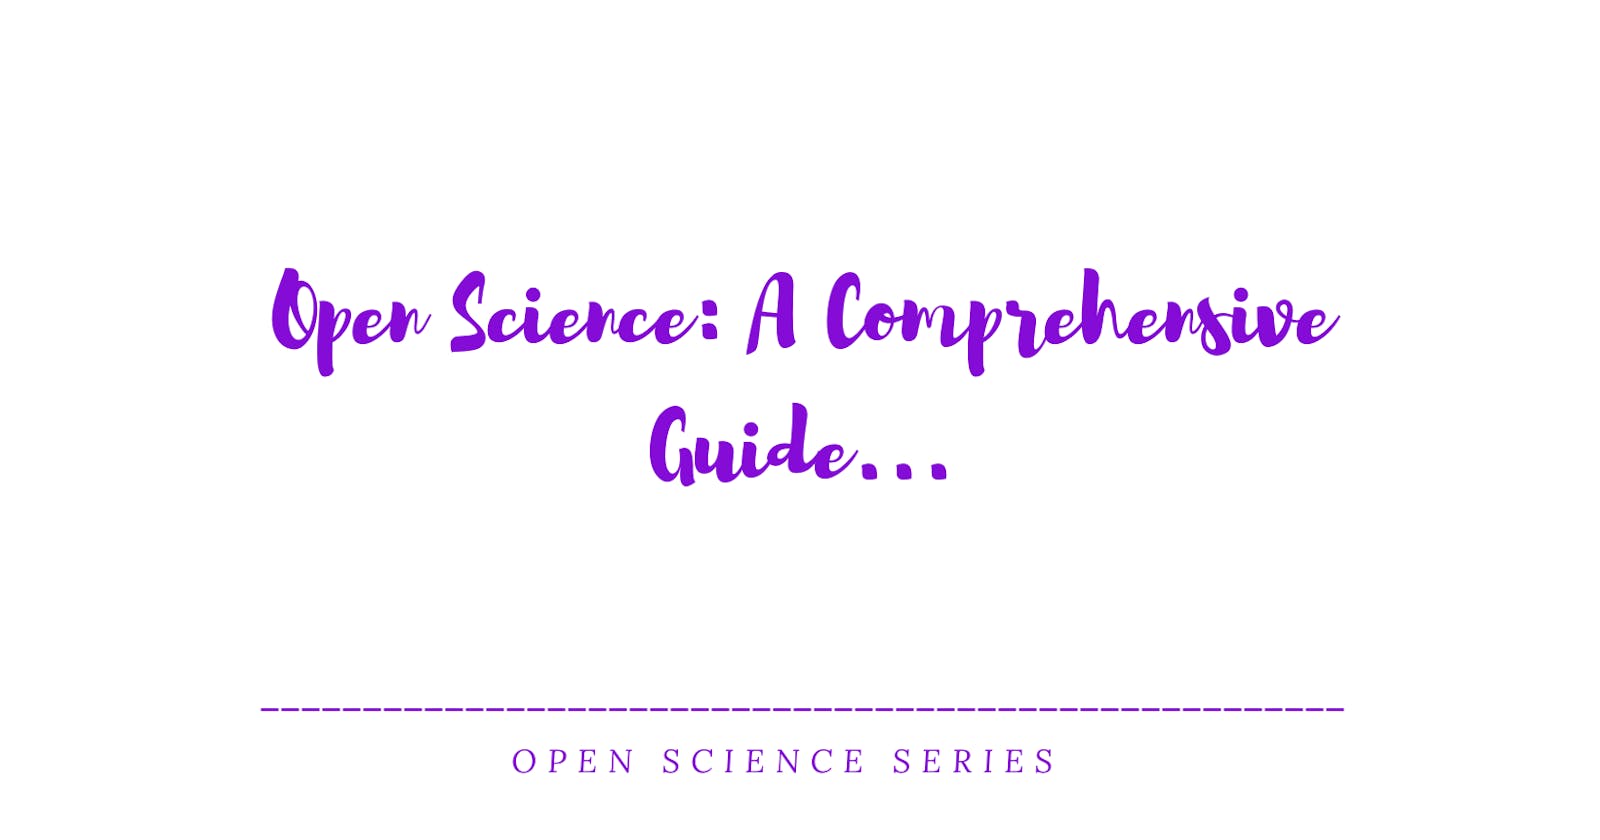 Open Science: A Comprehensive Guide...